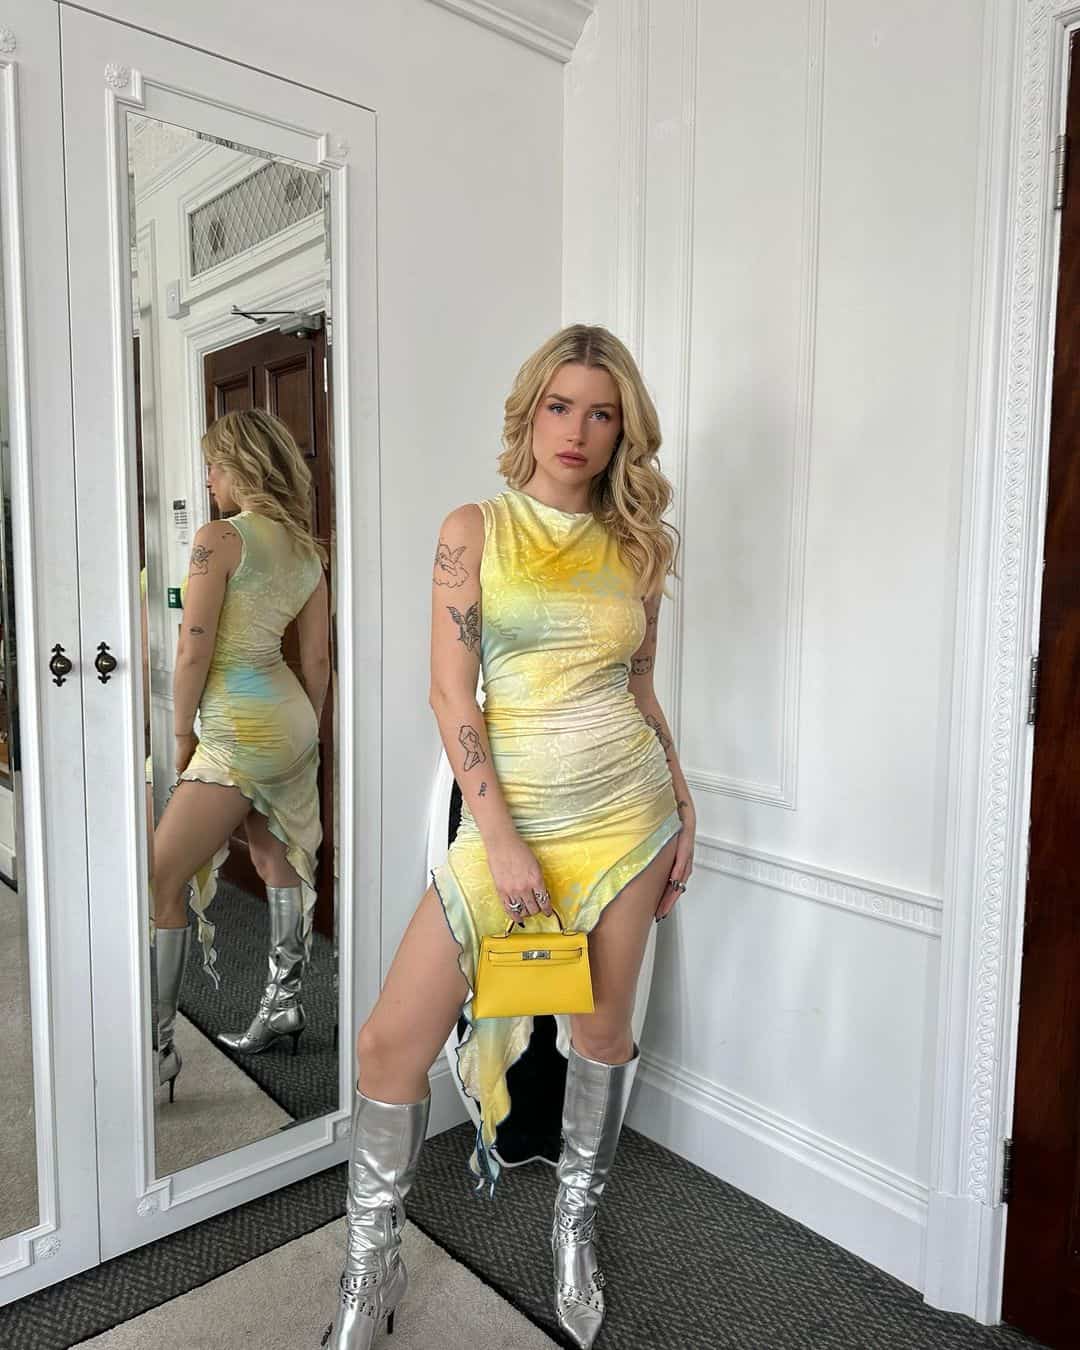 Lottie Moss Poses in a Figure-Hugging Yellow Dress and Silver Boots